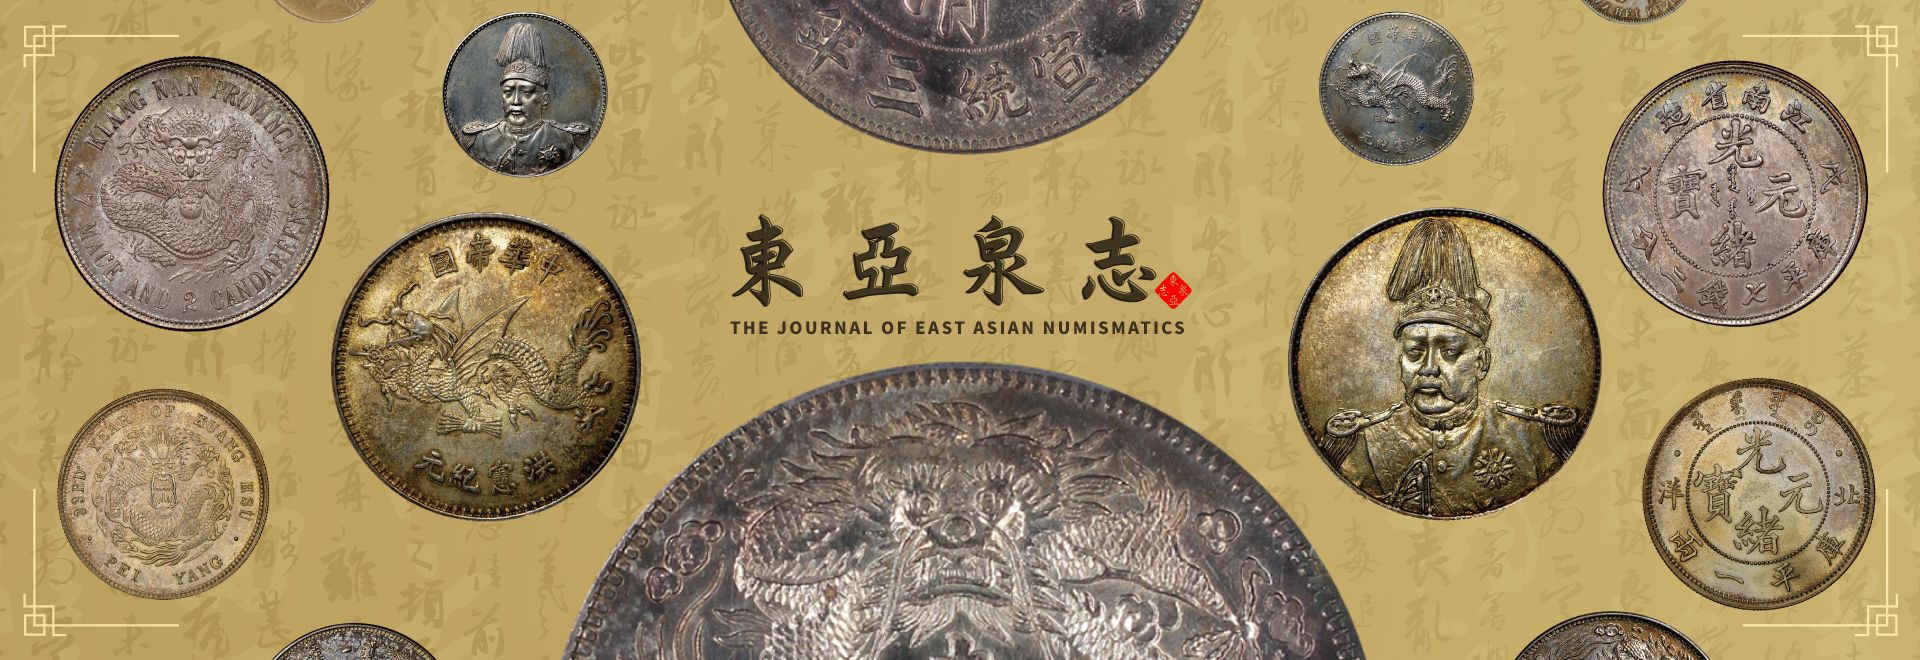 THE JOURNAL OF EAST ASIAN NUMISMATICS